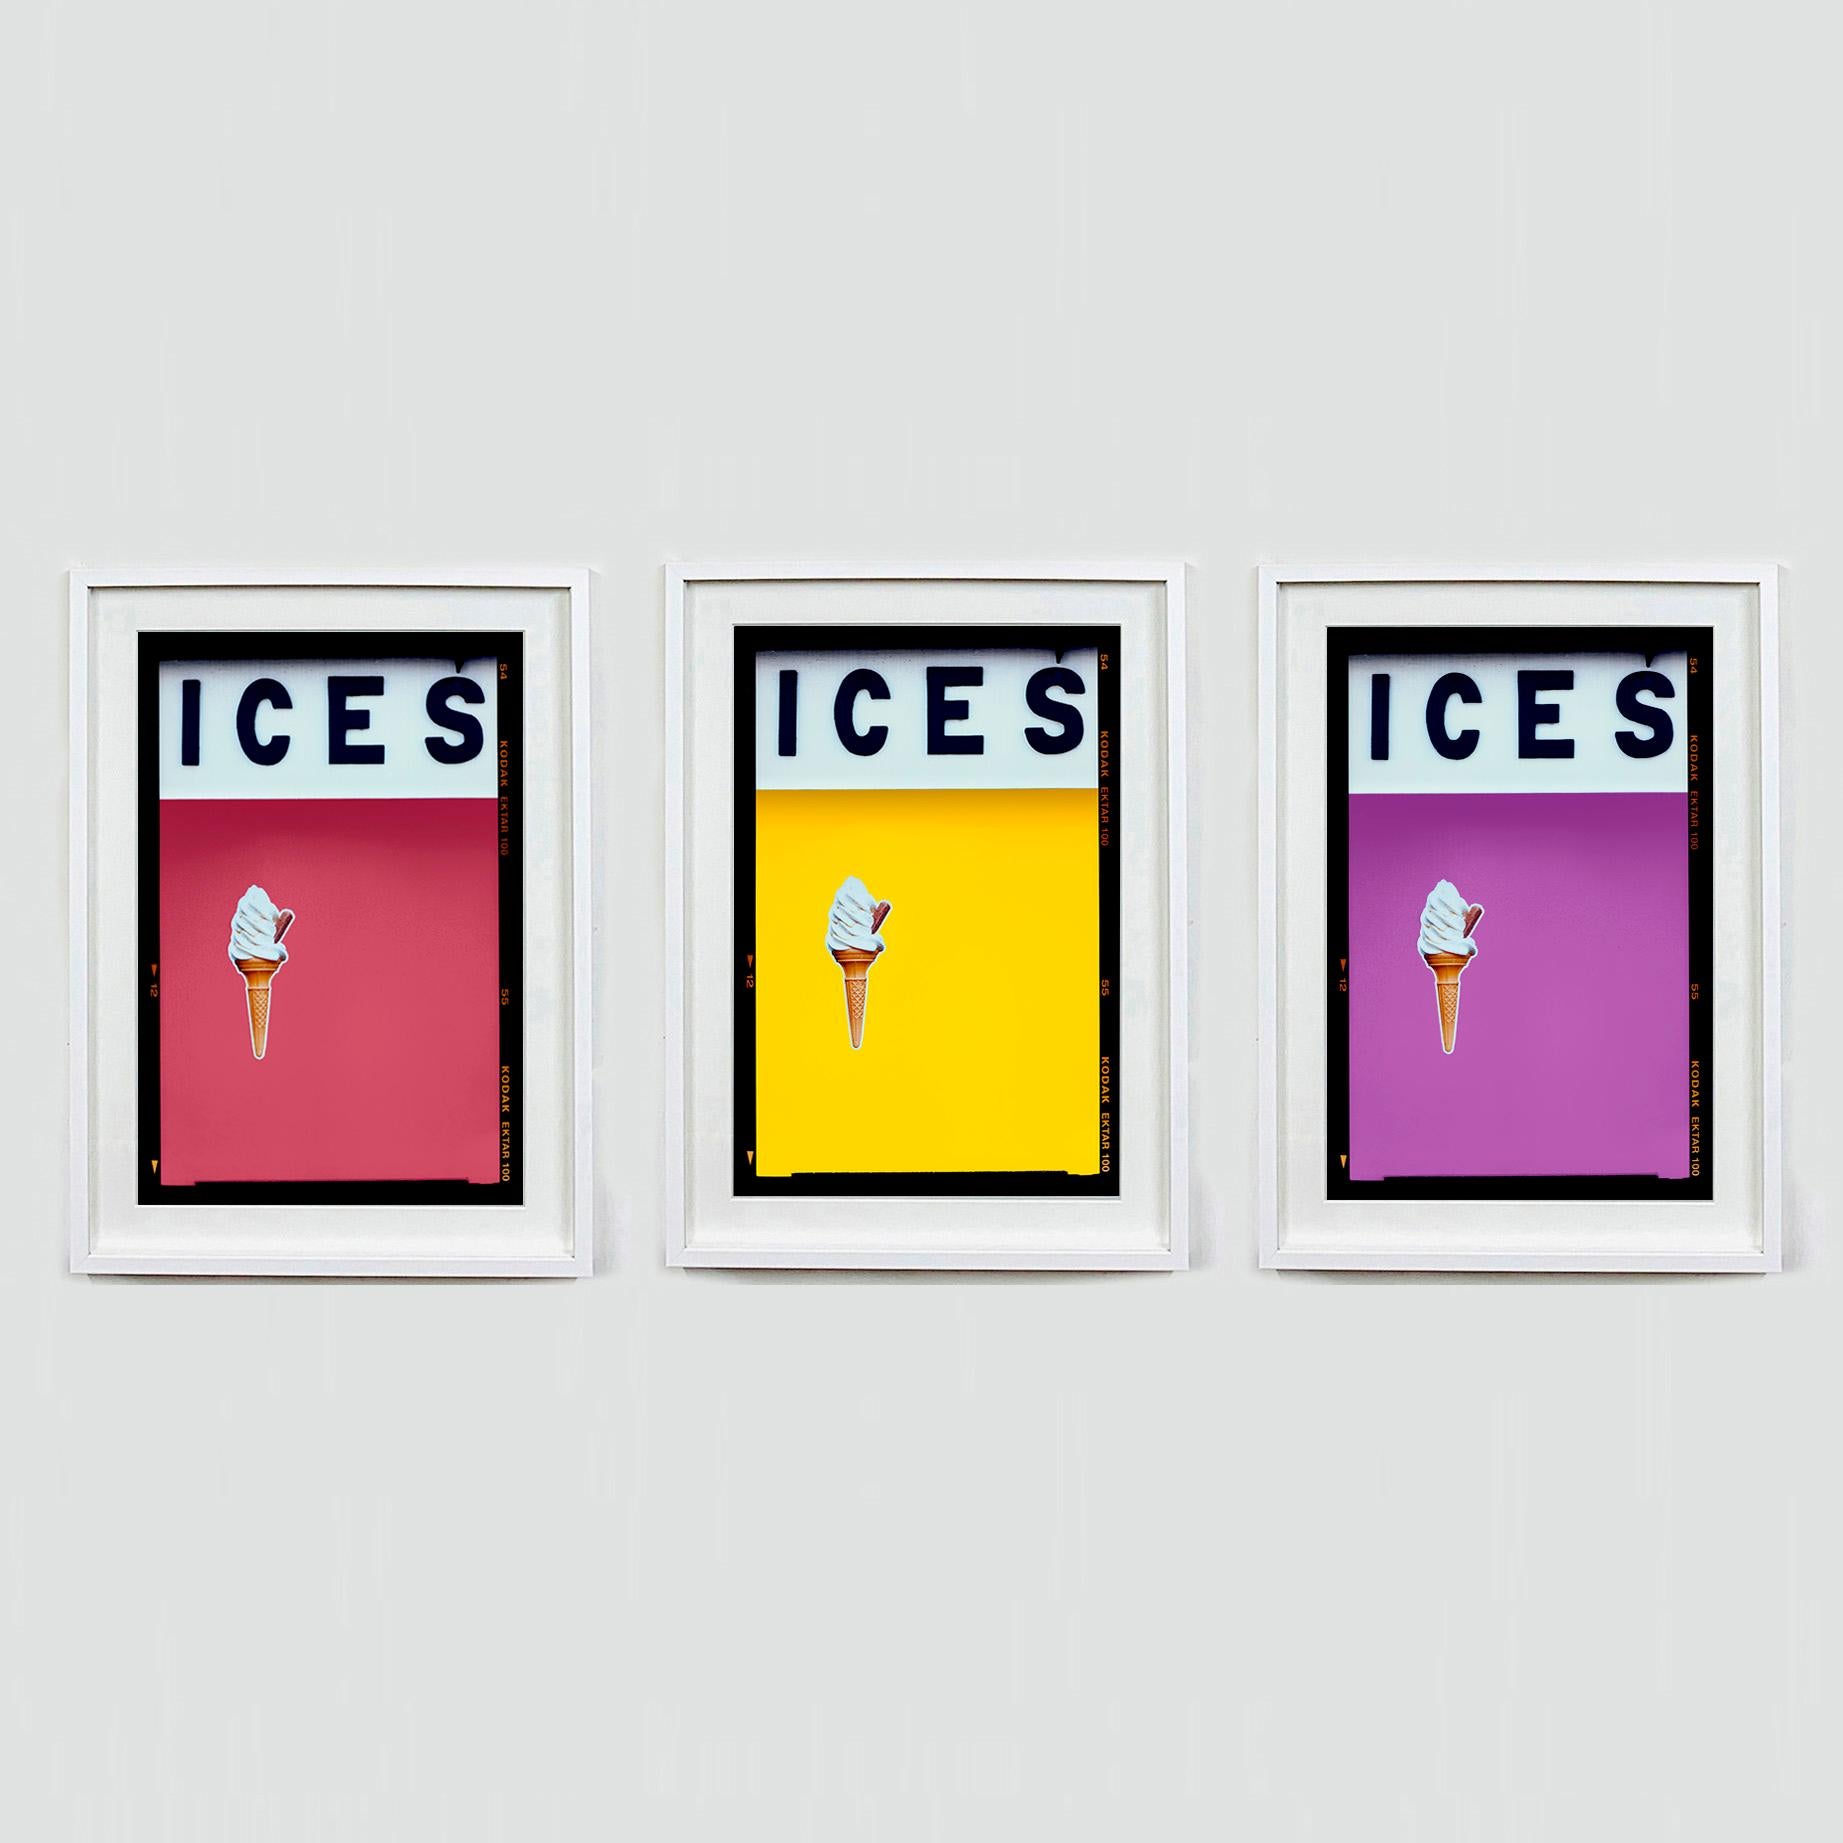 Ices (Raspberry), Bexhill-on-Sea - British seaside color photography For Sale 1